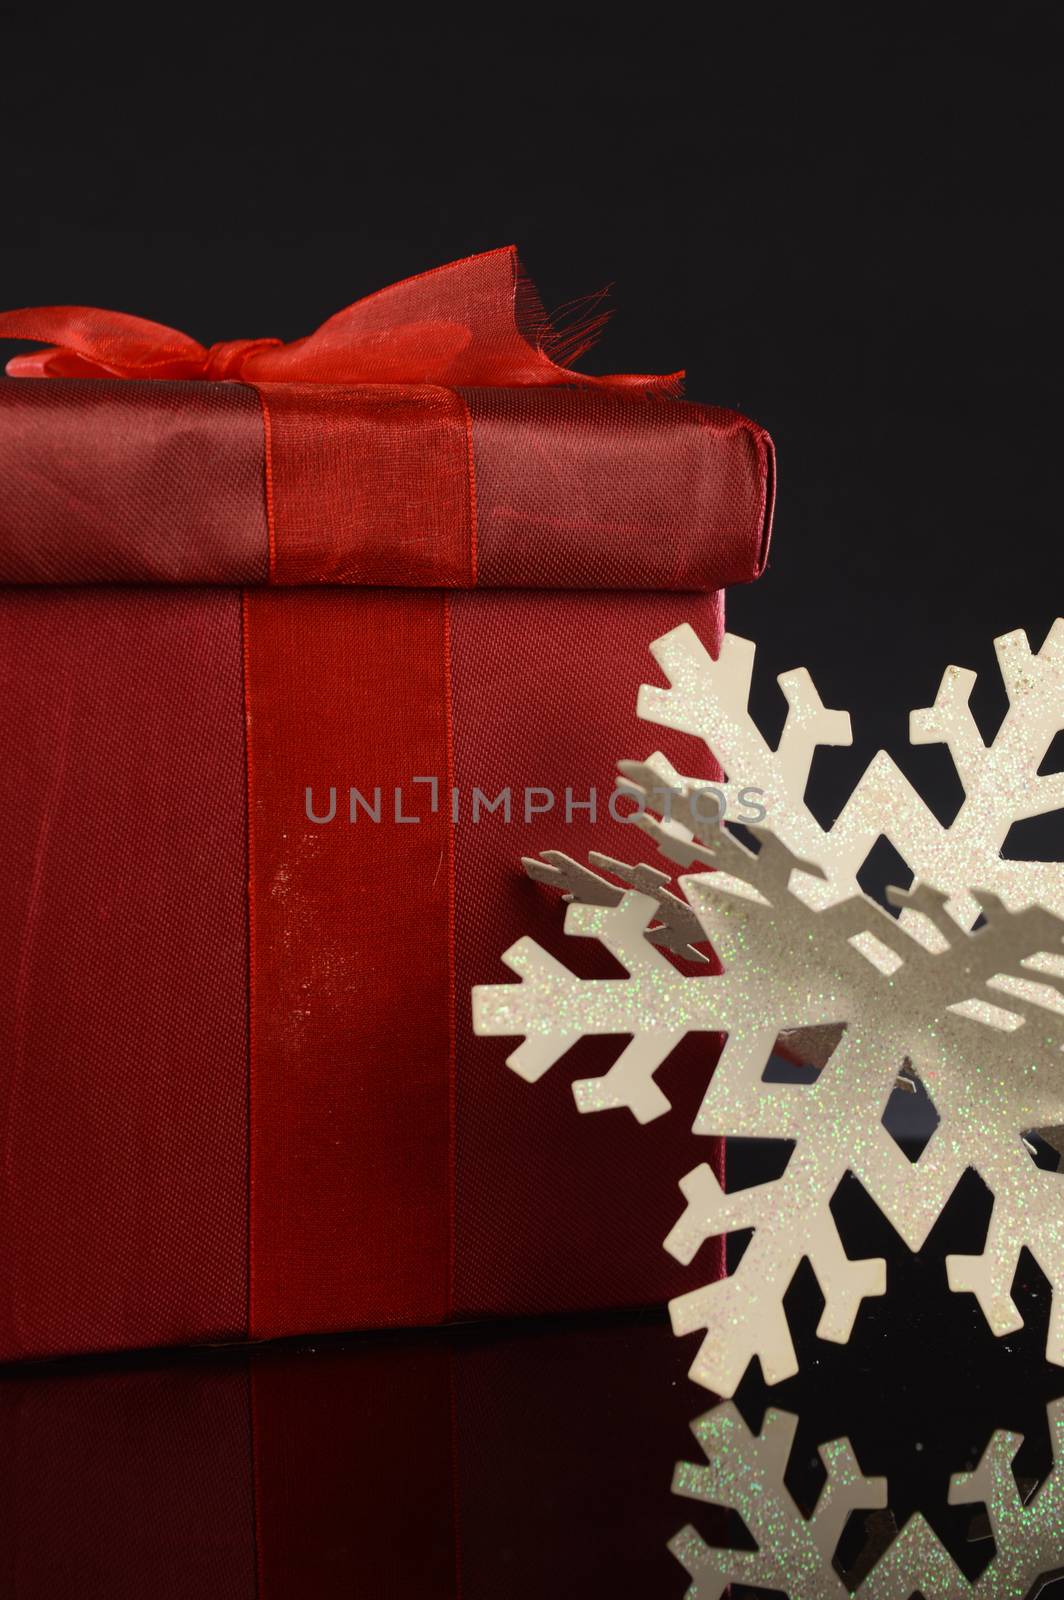 A closeup image of a red Christmas gift with decorative items to compliament the festive season.